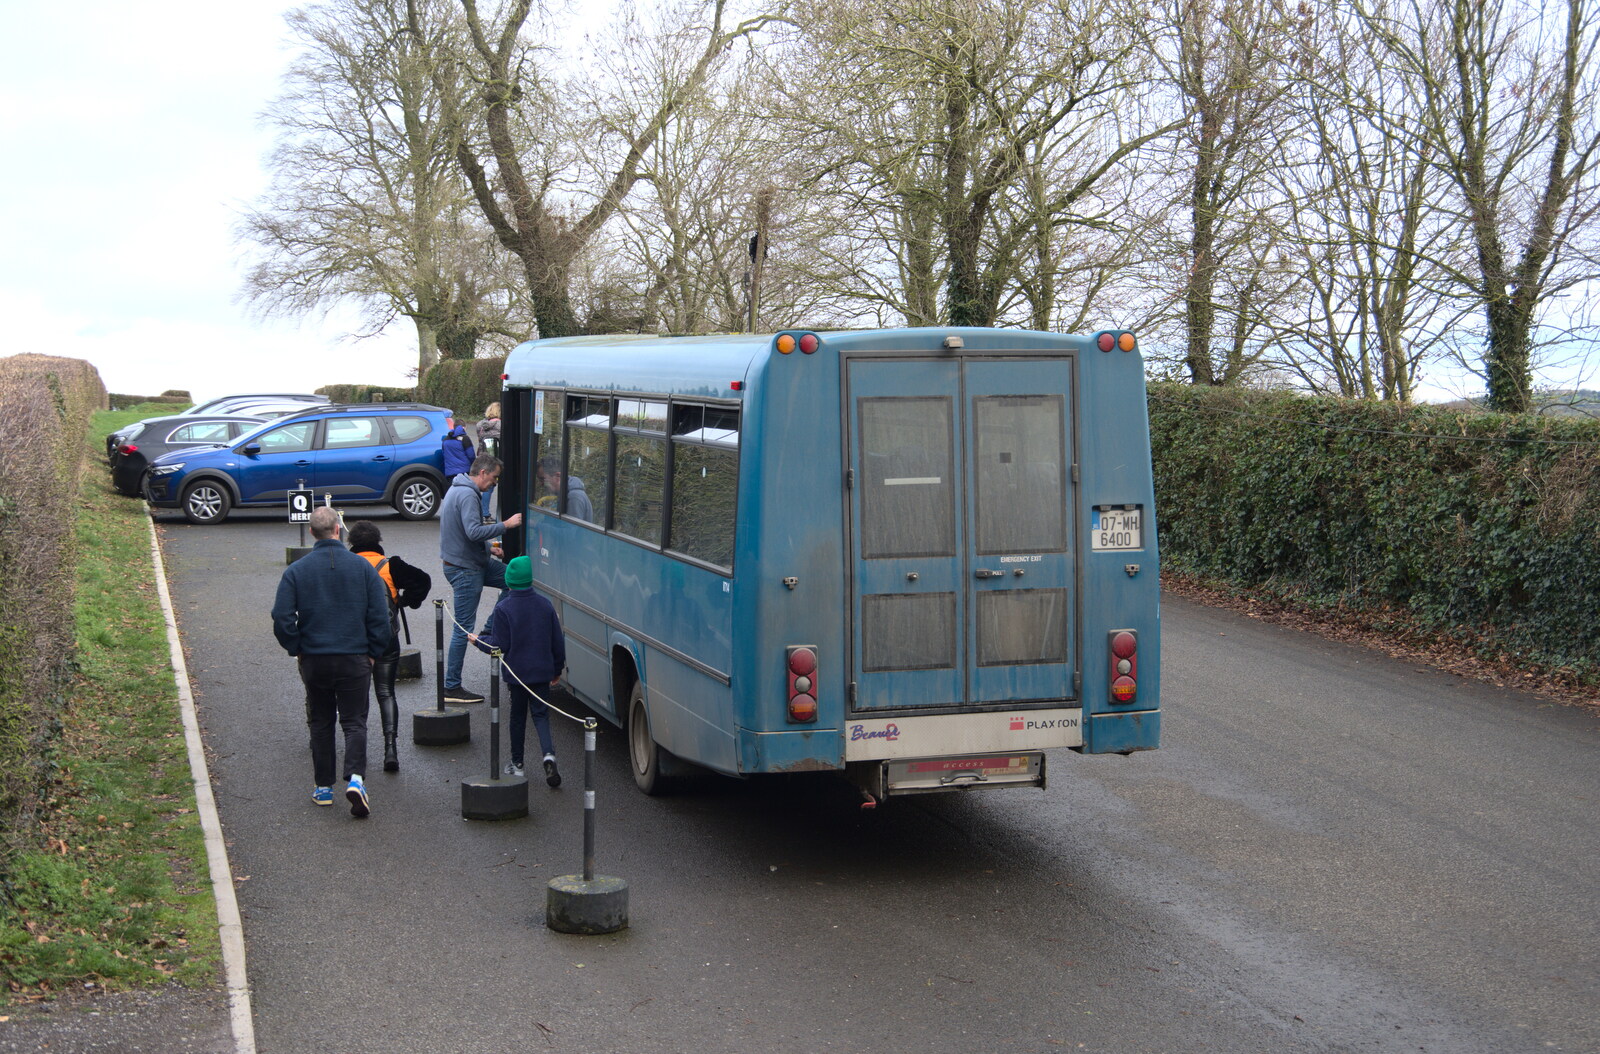 Blackrock North and Newgrange, County Louth, Ireland - 16th February 2023: Our bus is nearly as old as the tomb